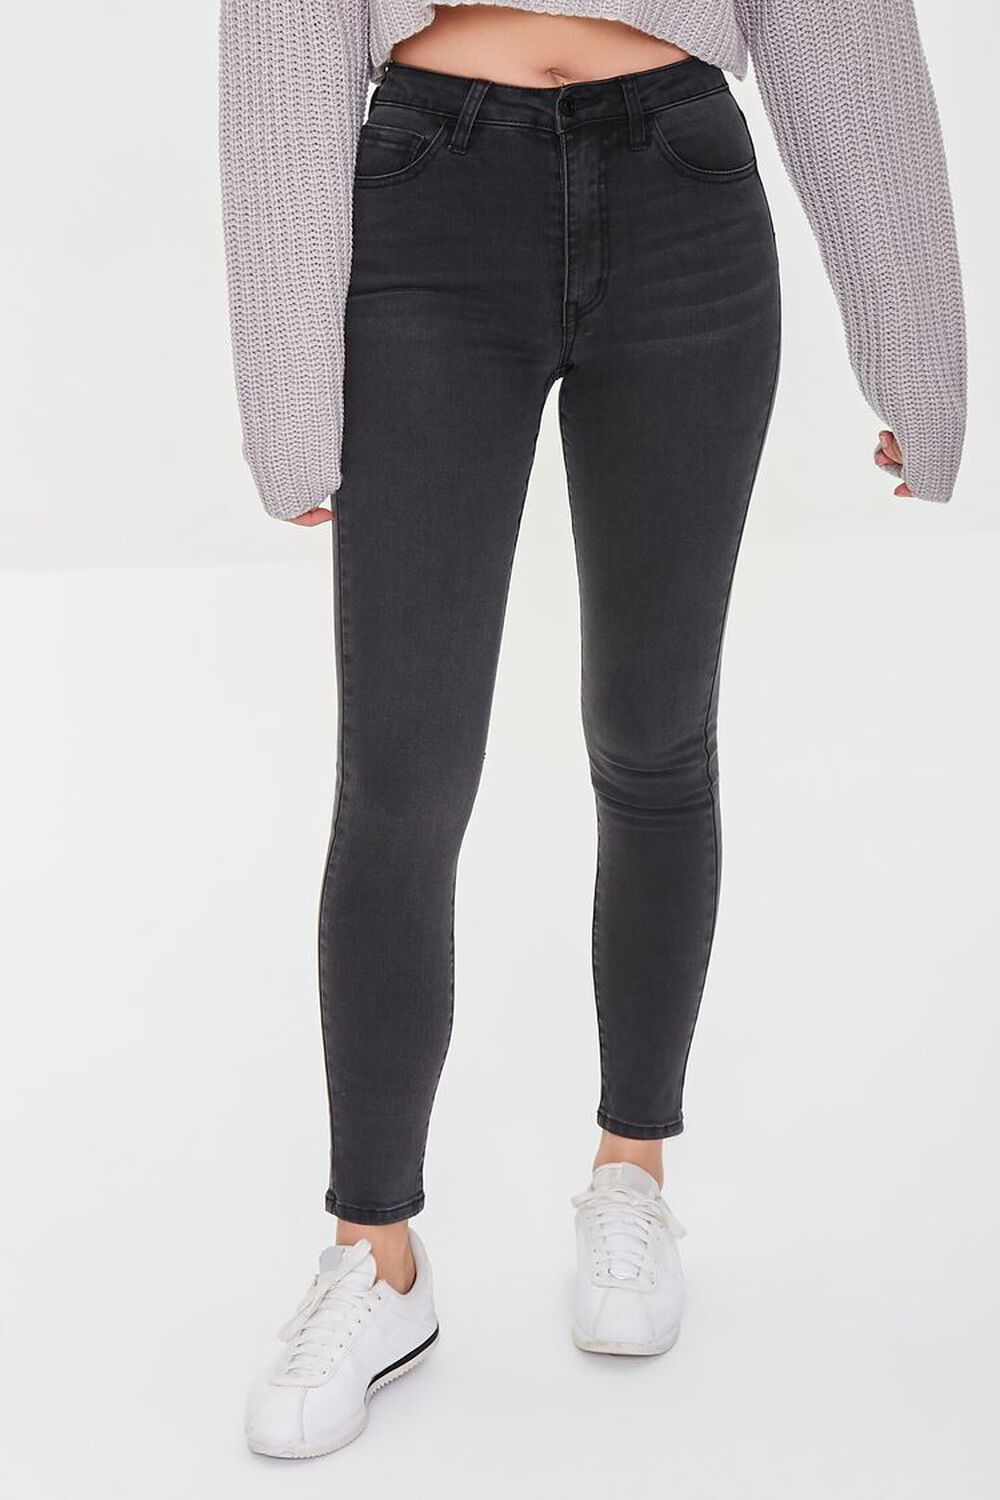 WASHED BLACK Essential Mid-Rise Skinny Jeans, image 1